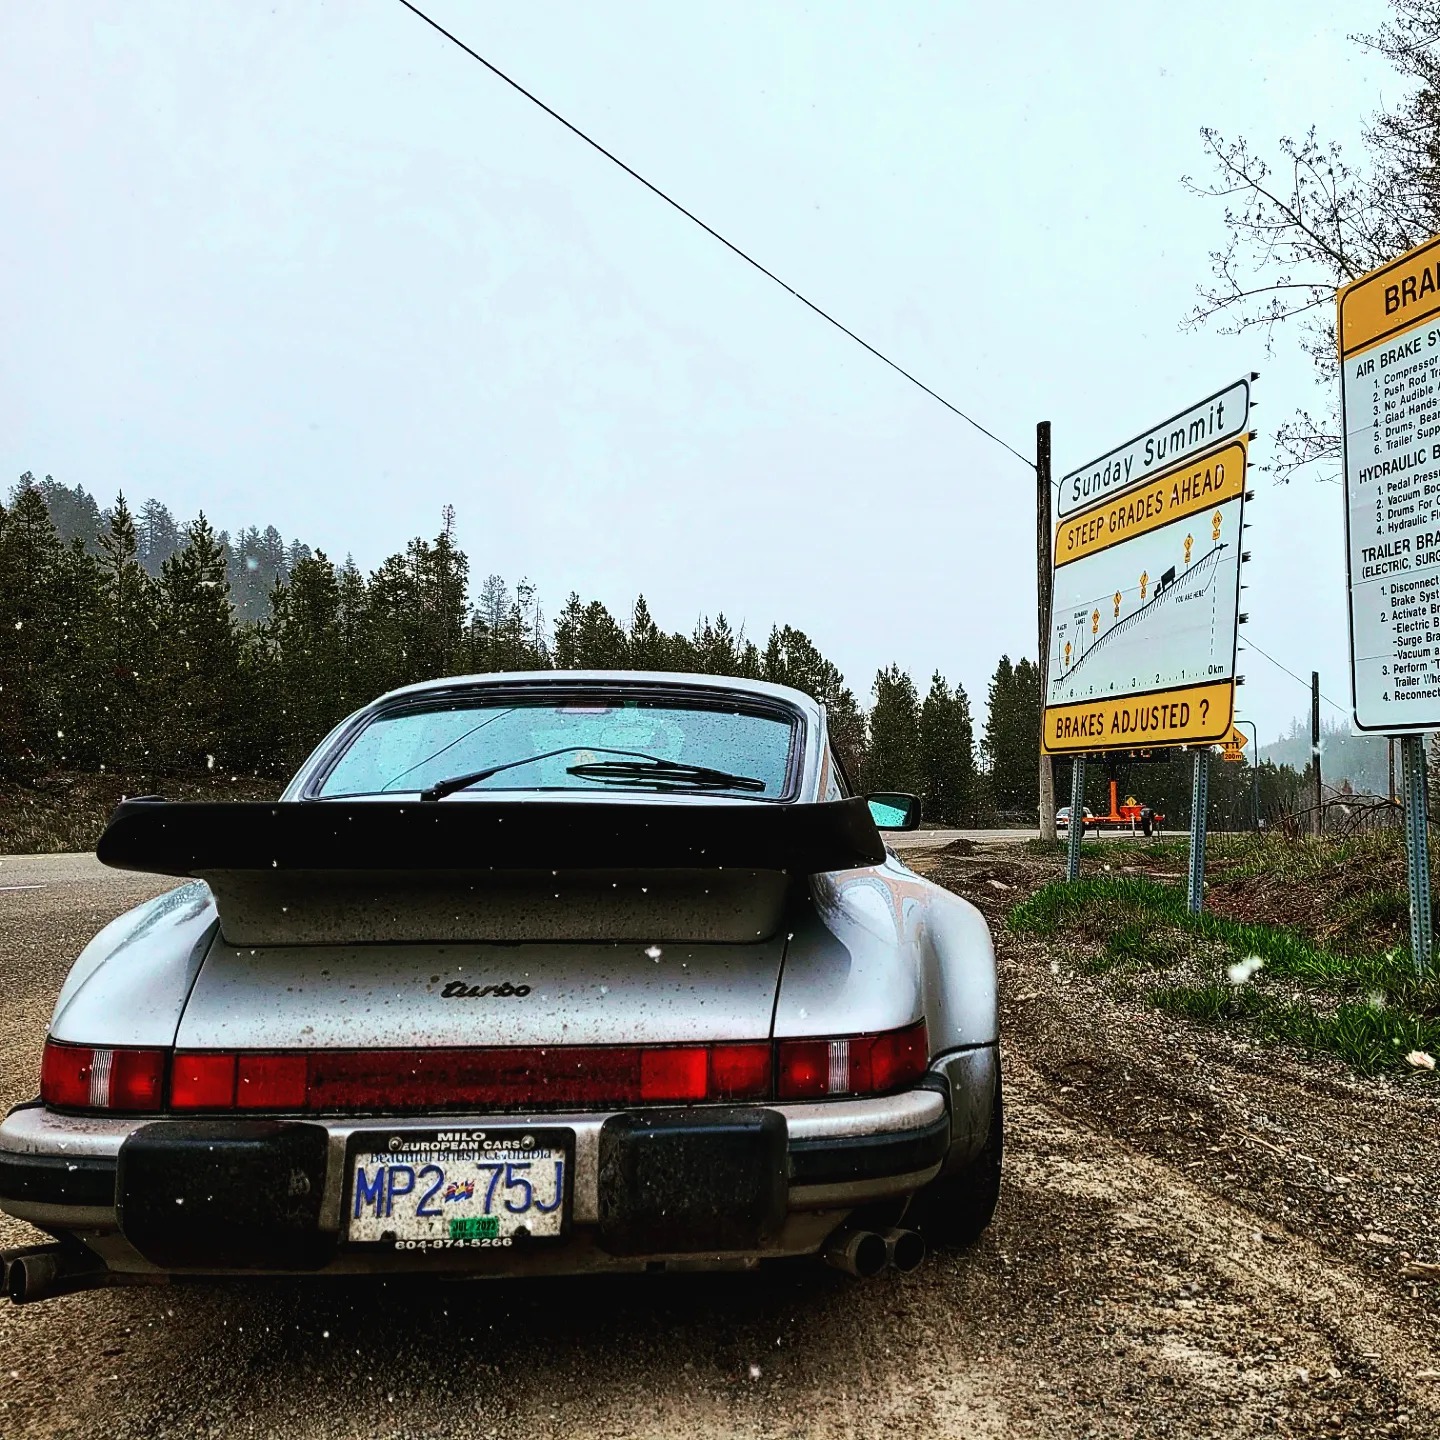 Car Collector Ms Helen Porsche 911 Turbo pull off steep graded road signs